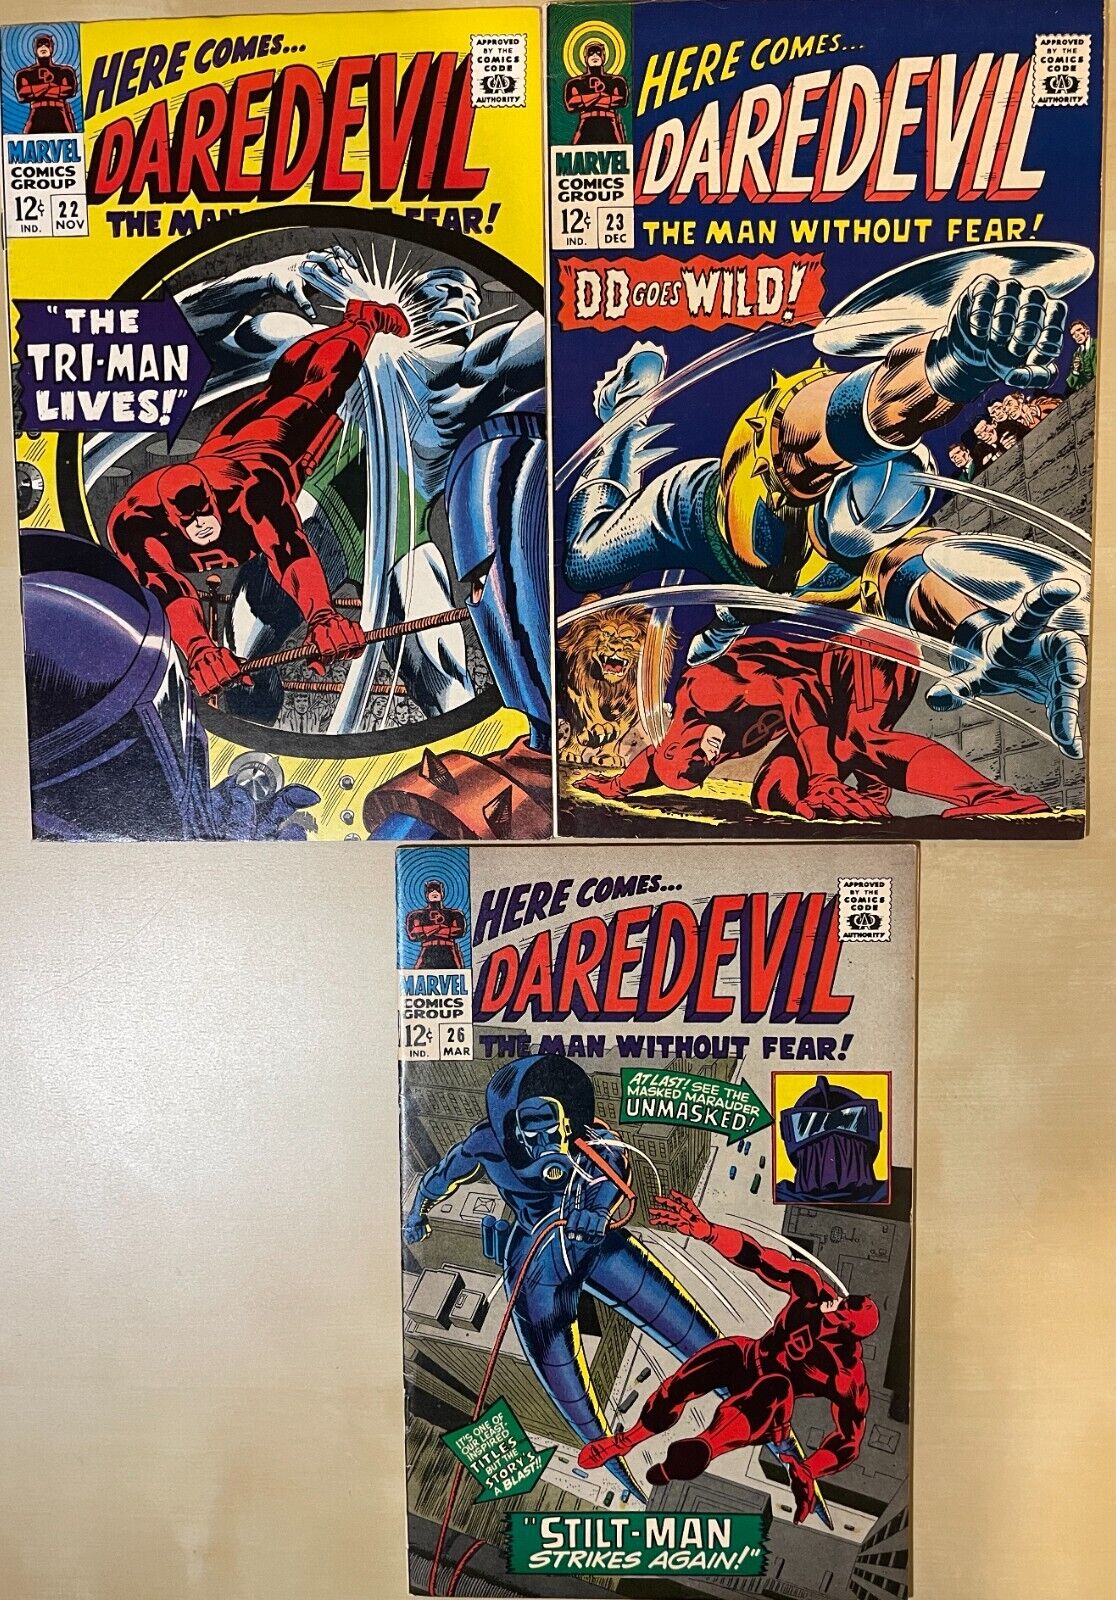 DAREDEVIL #22 23 26 (1966-67) FN to FN+ LOT OF 3 SILVER AGE MARVEL COMICS SOLID